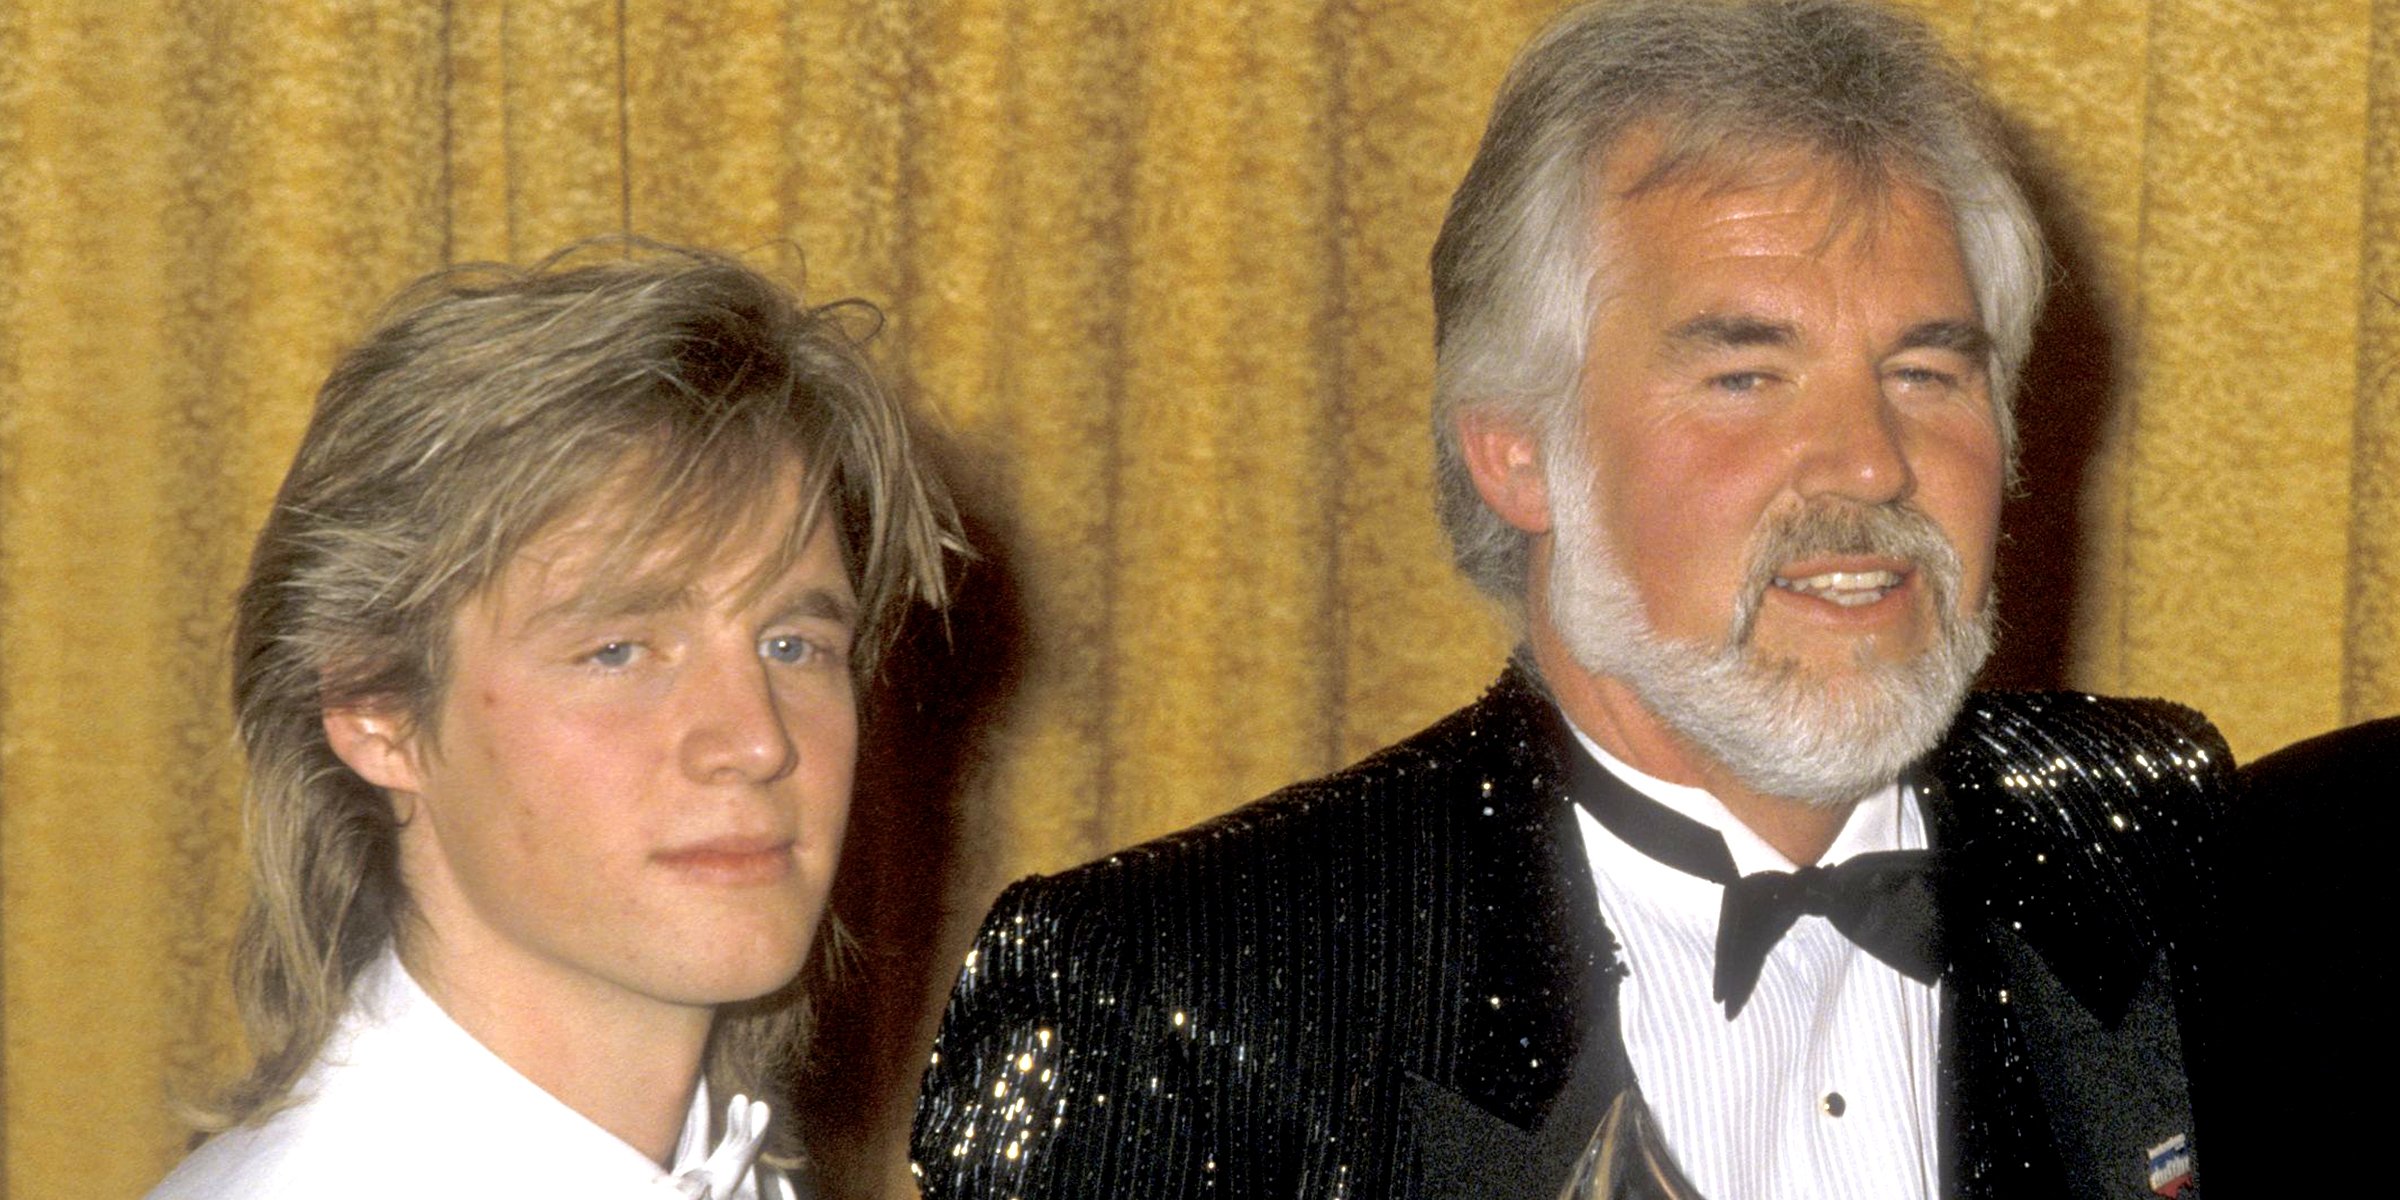 Kenny Rogers Jr. with his father Kenny Rogers Sr. | Source: Getty Images